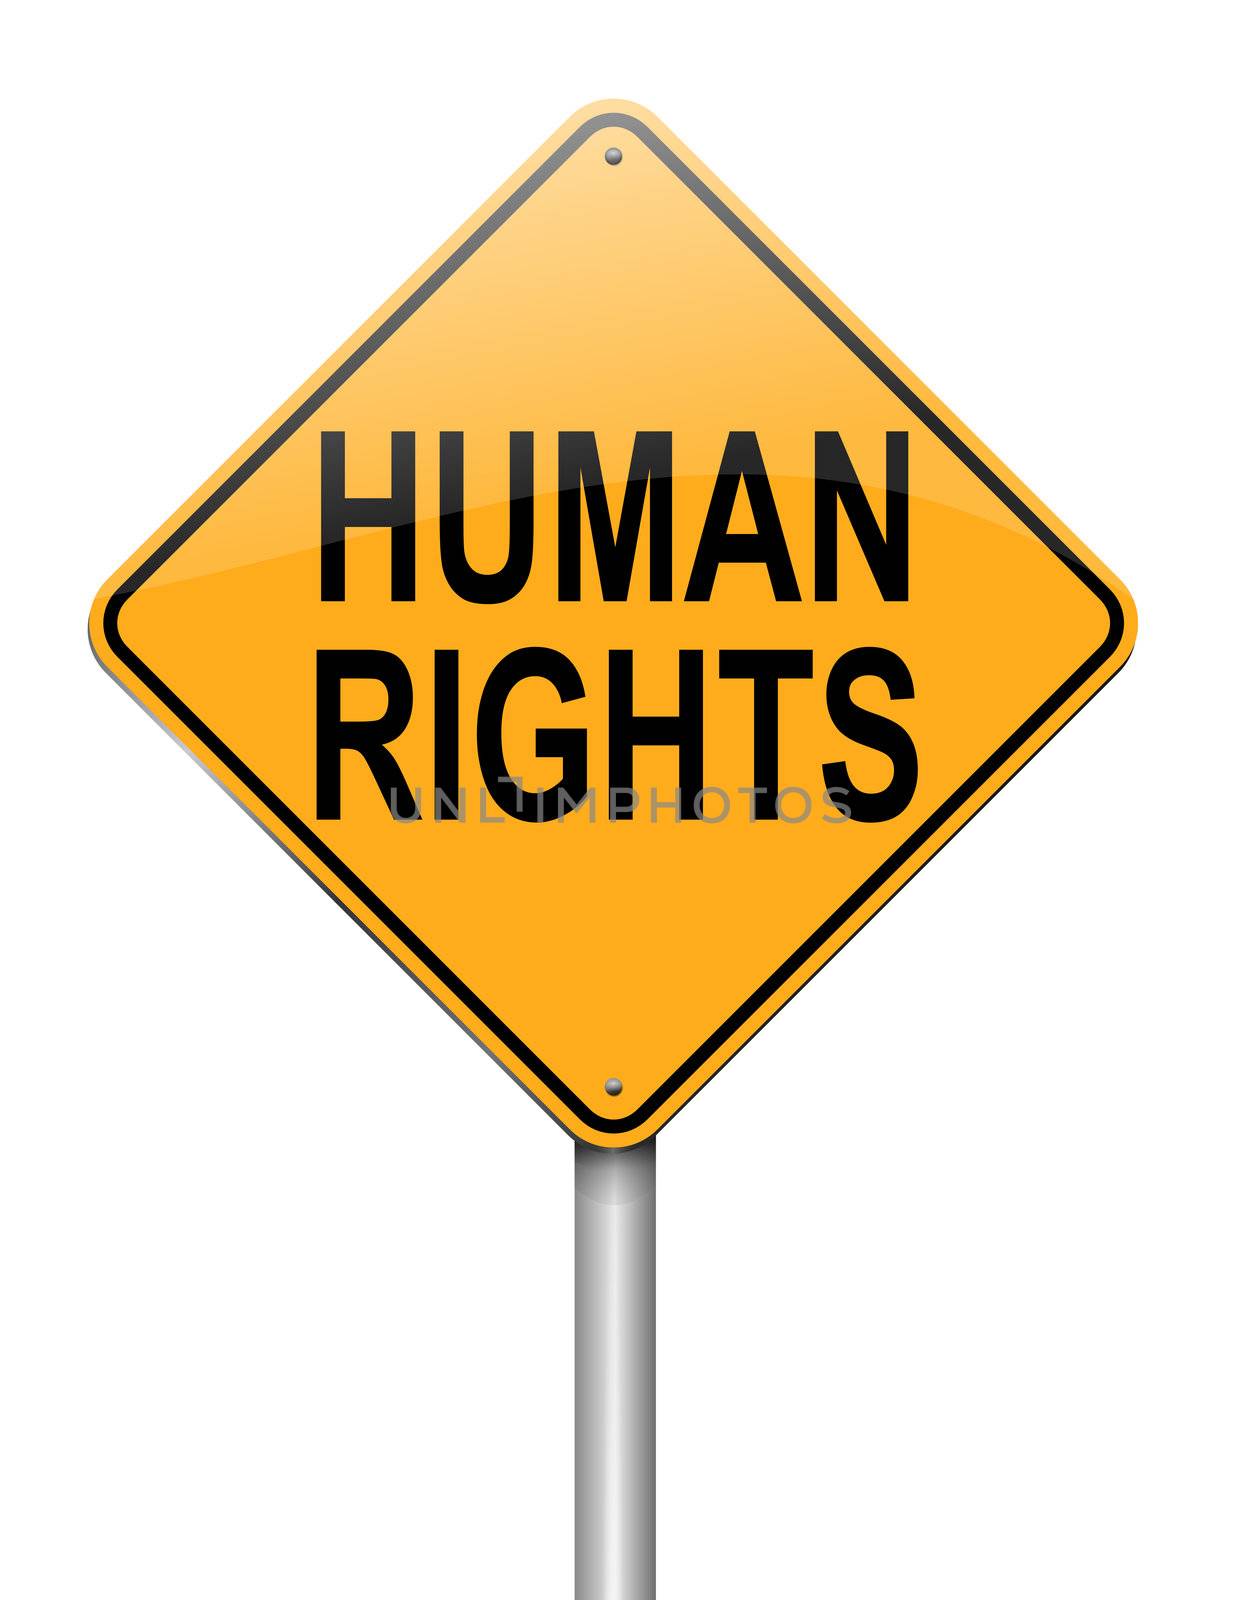 Human rights concept. by 72soul